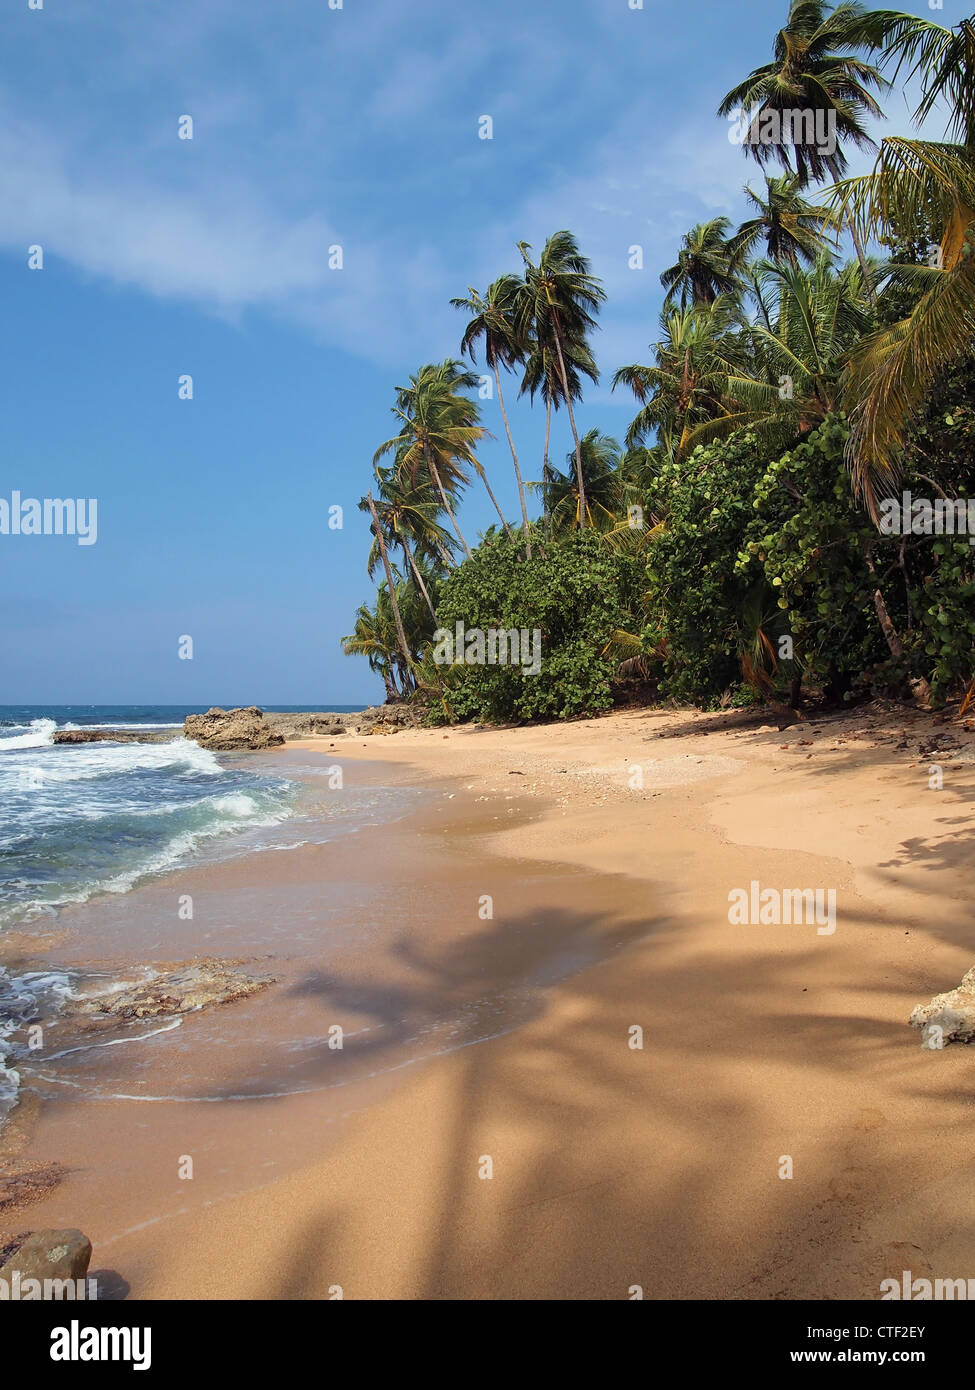 Pristine beach with shade of coconut tree on the sand, Costa Rica, Central America Stock Photo